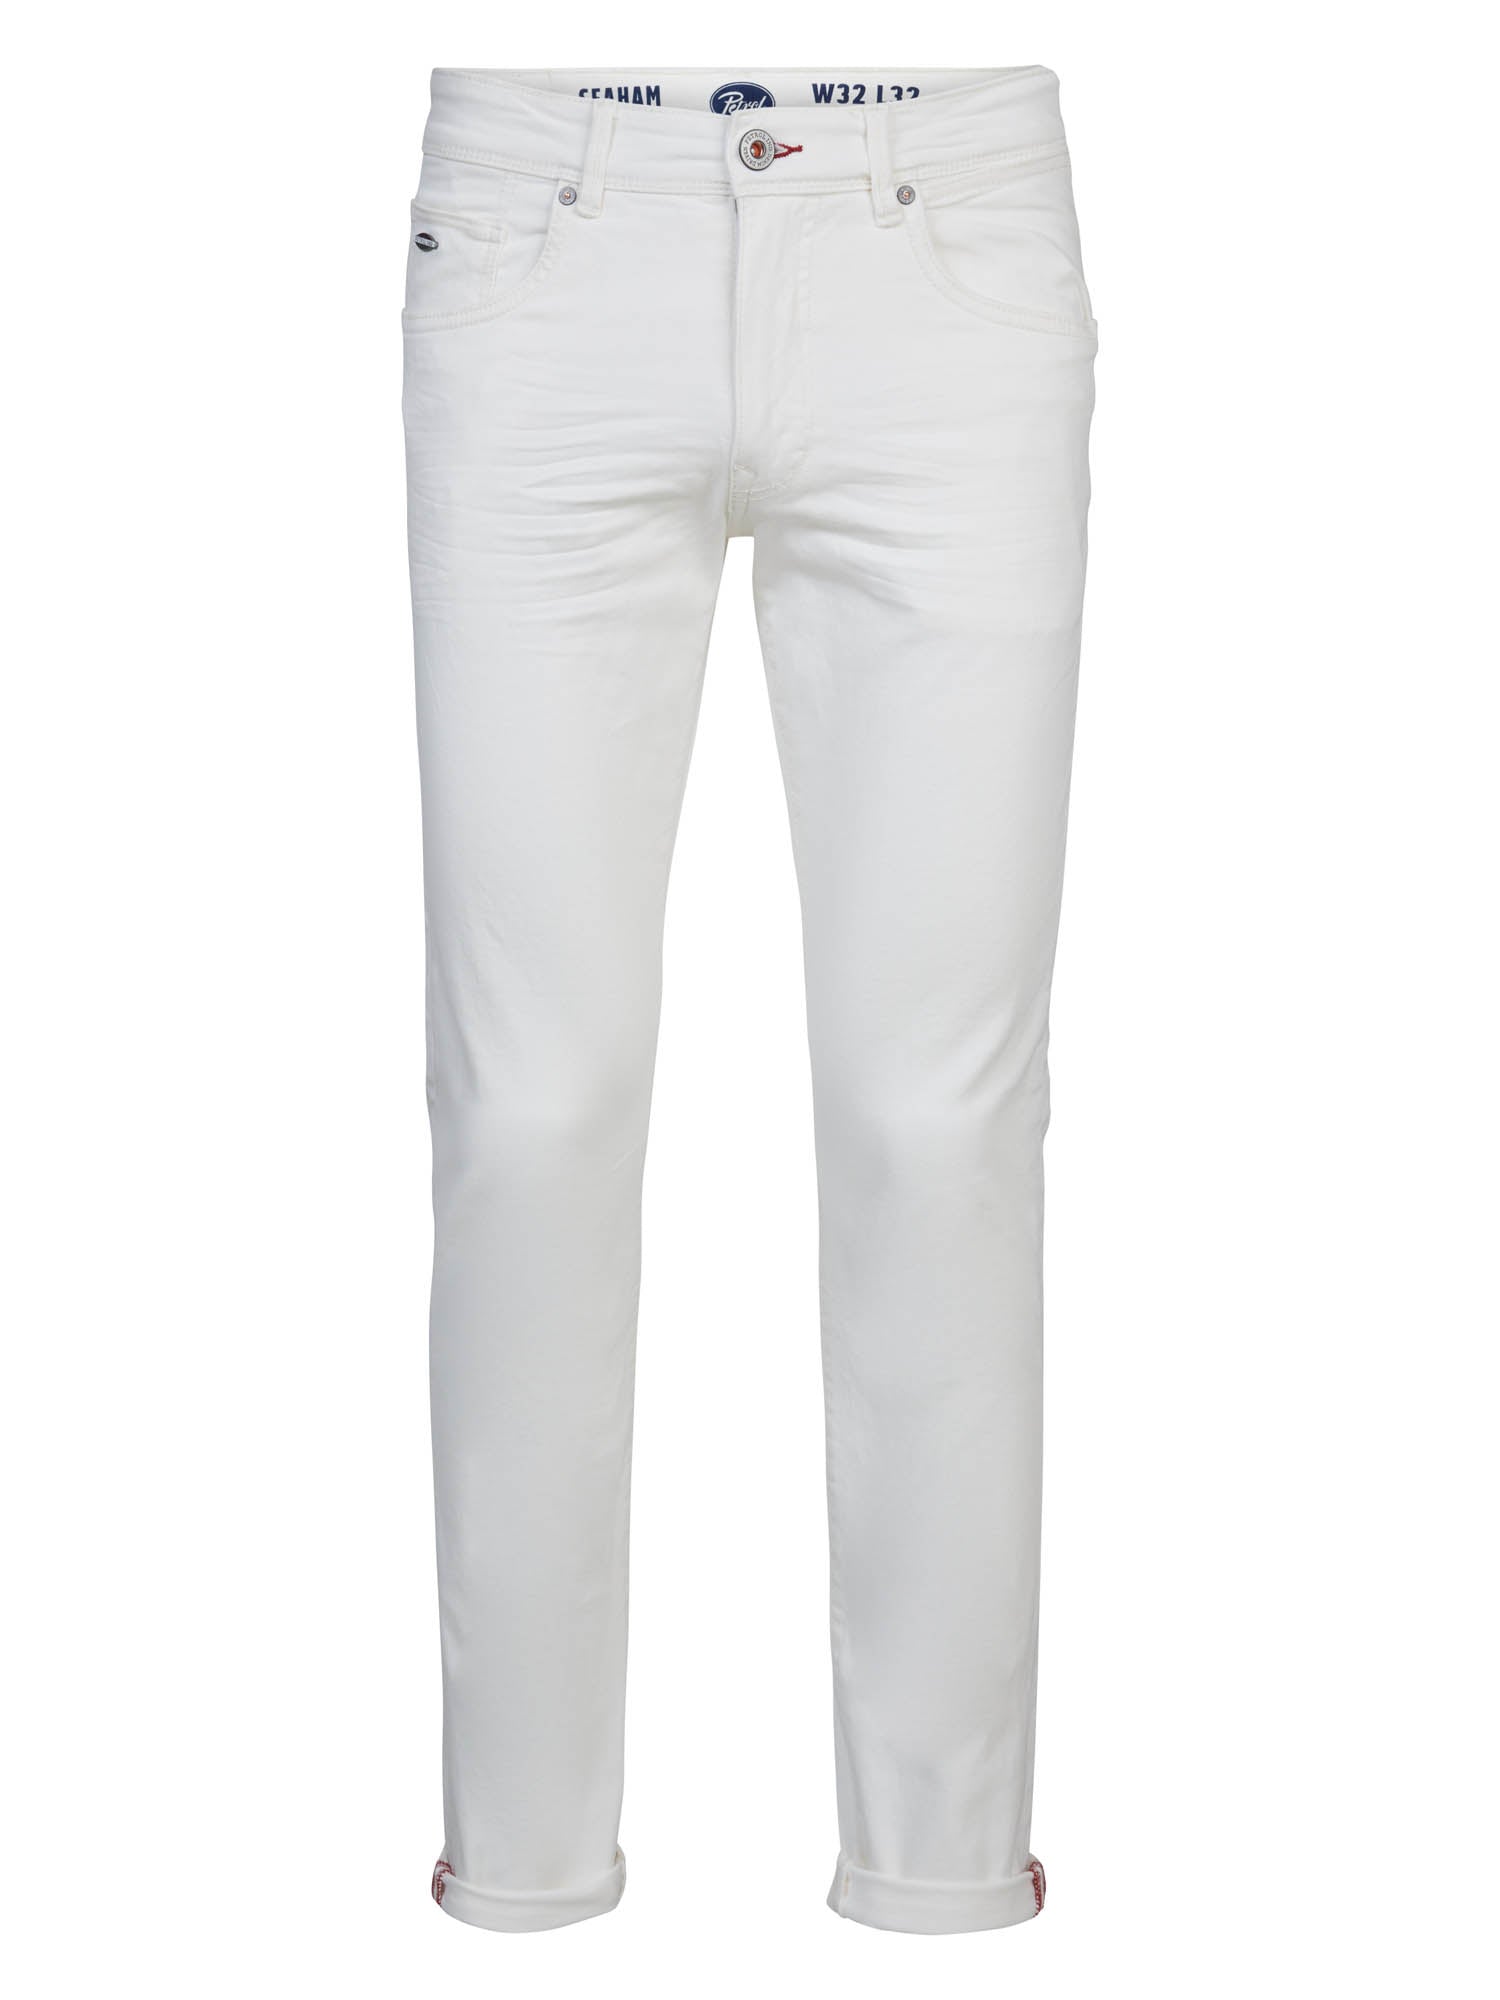 Petrol Industries Seaham Coloured, Slim-fit Jeans Bright White - 33